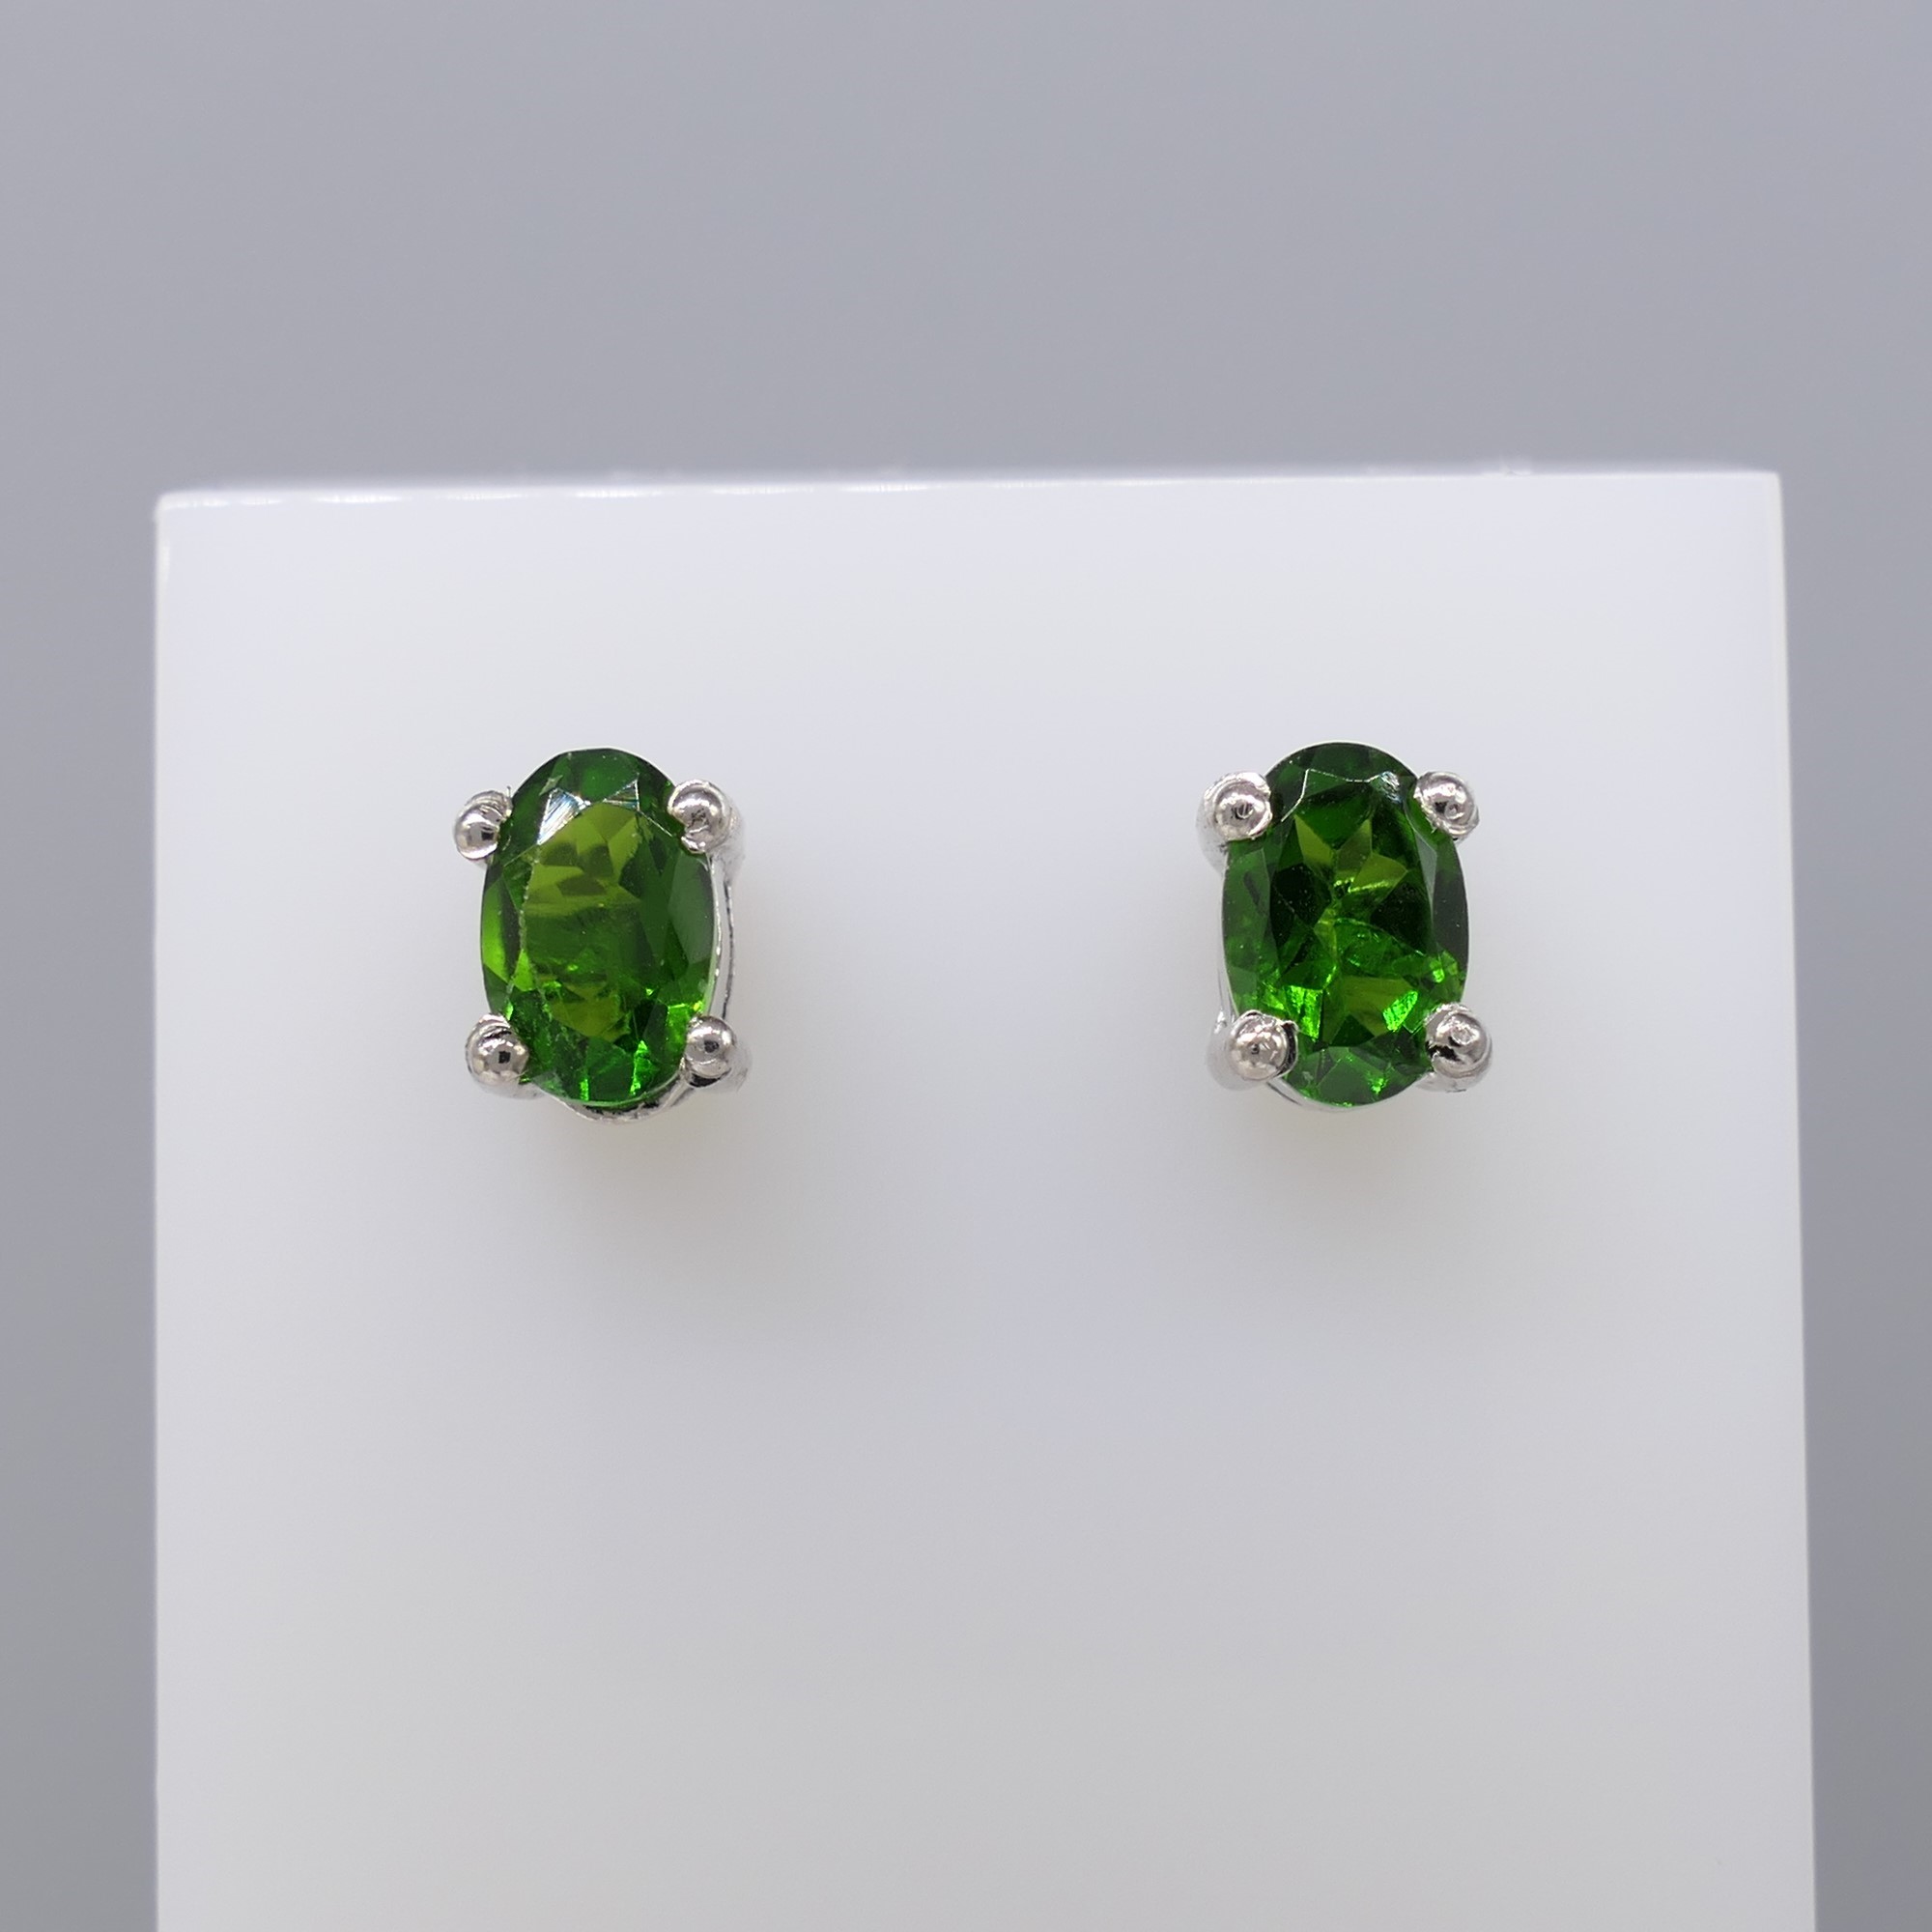 Pair Of Natural Chrome Diopside Ear Studs In Sterl - Image 7 of 7